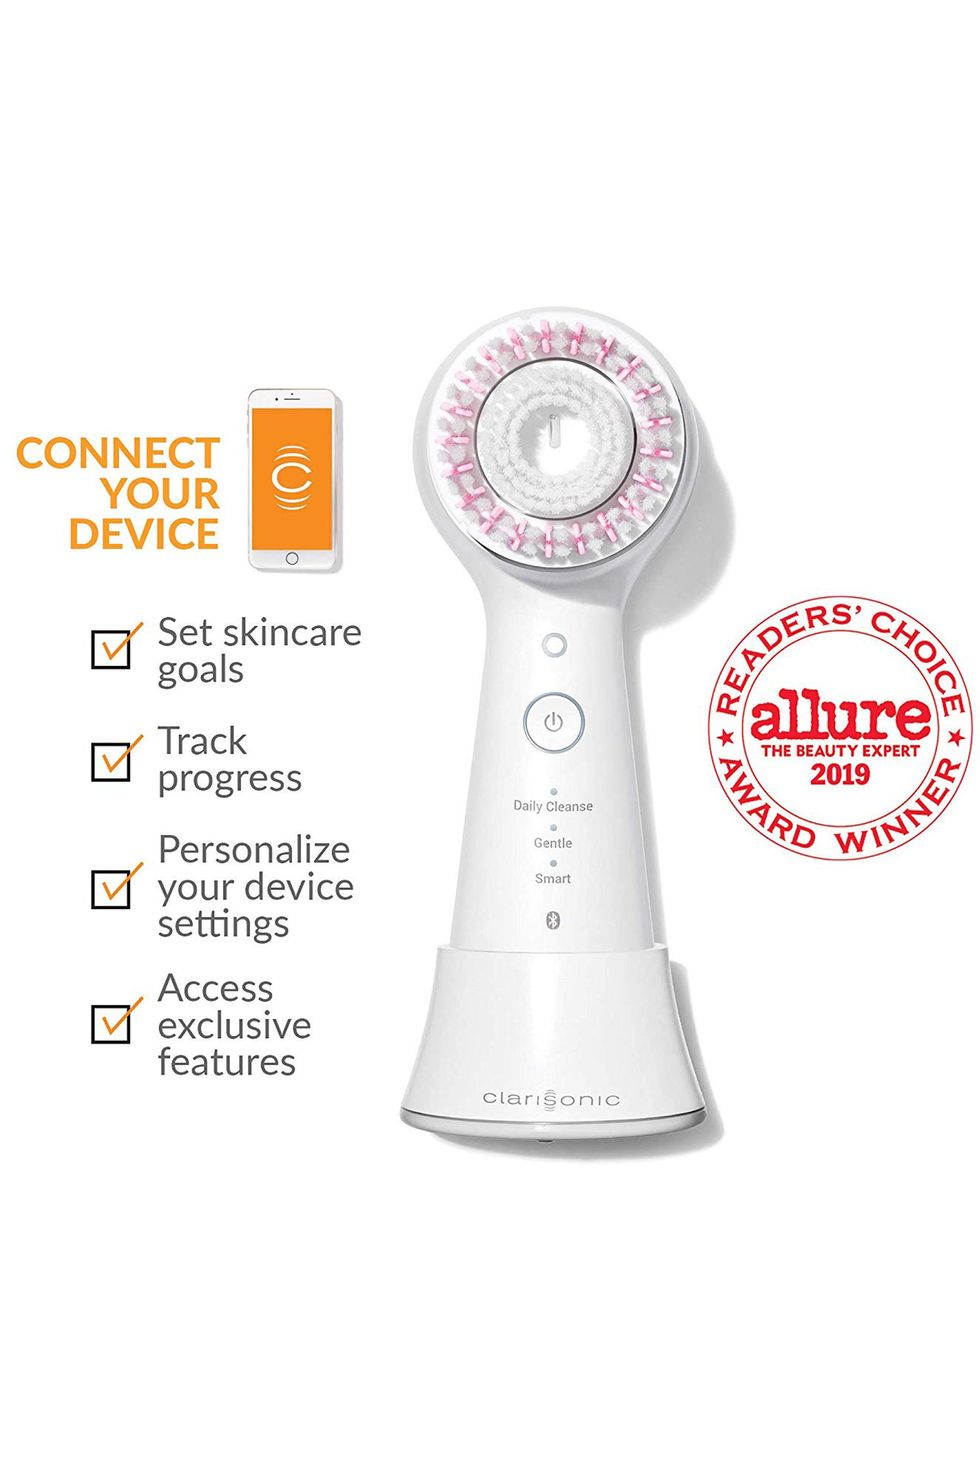 Clarisonic Mia Smart Sonic Facial Cleansing Brush- Use for Exfoliating, Anti-Aging and Makeup Blending